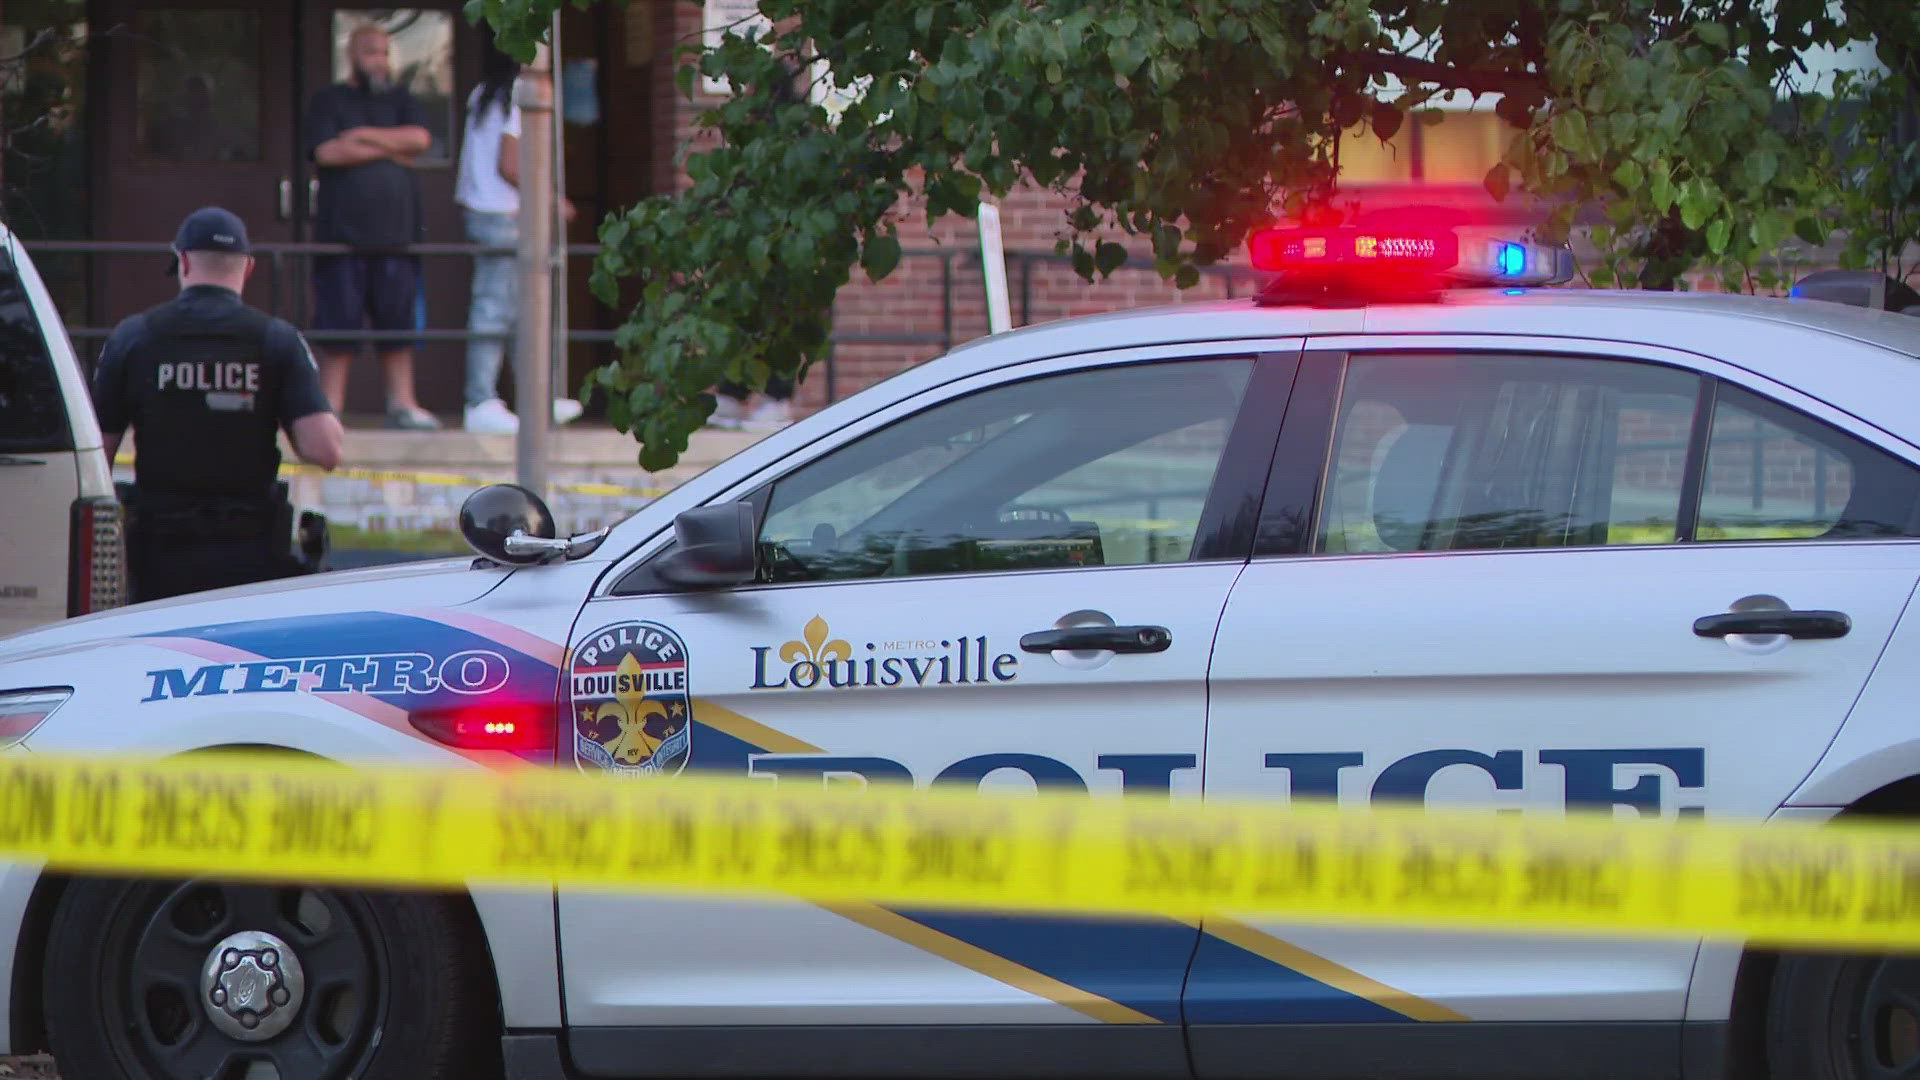 Louisville Metro Police said officers responded to call of a shooting in the 500 block of South 18th Street around 8:00 p.m.